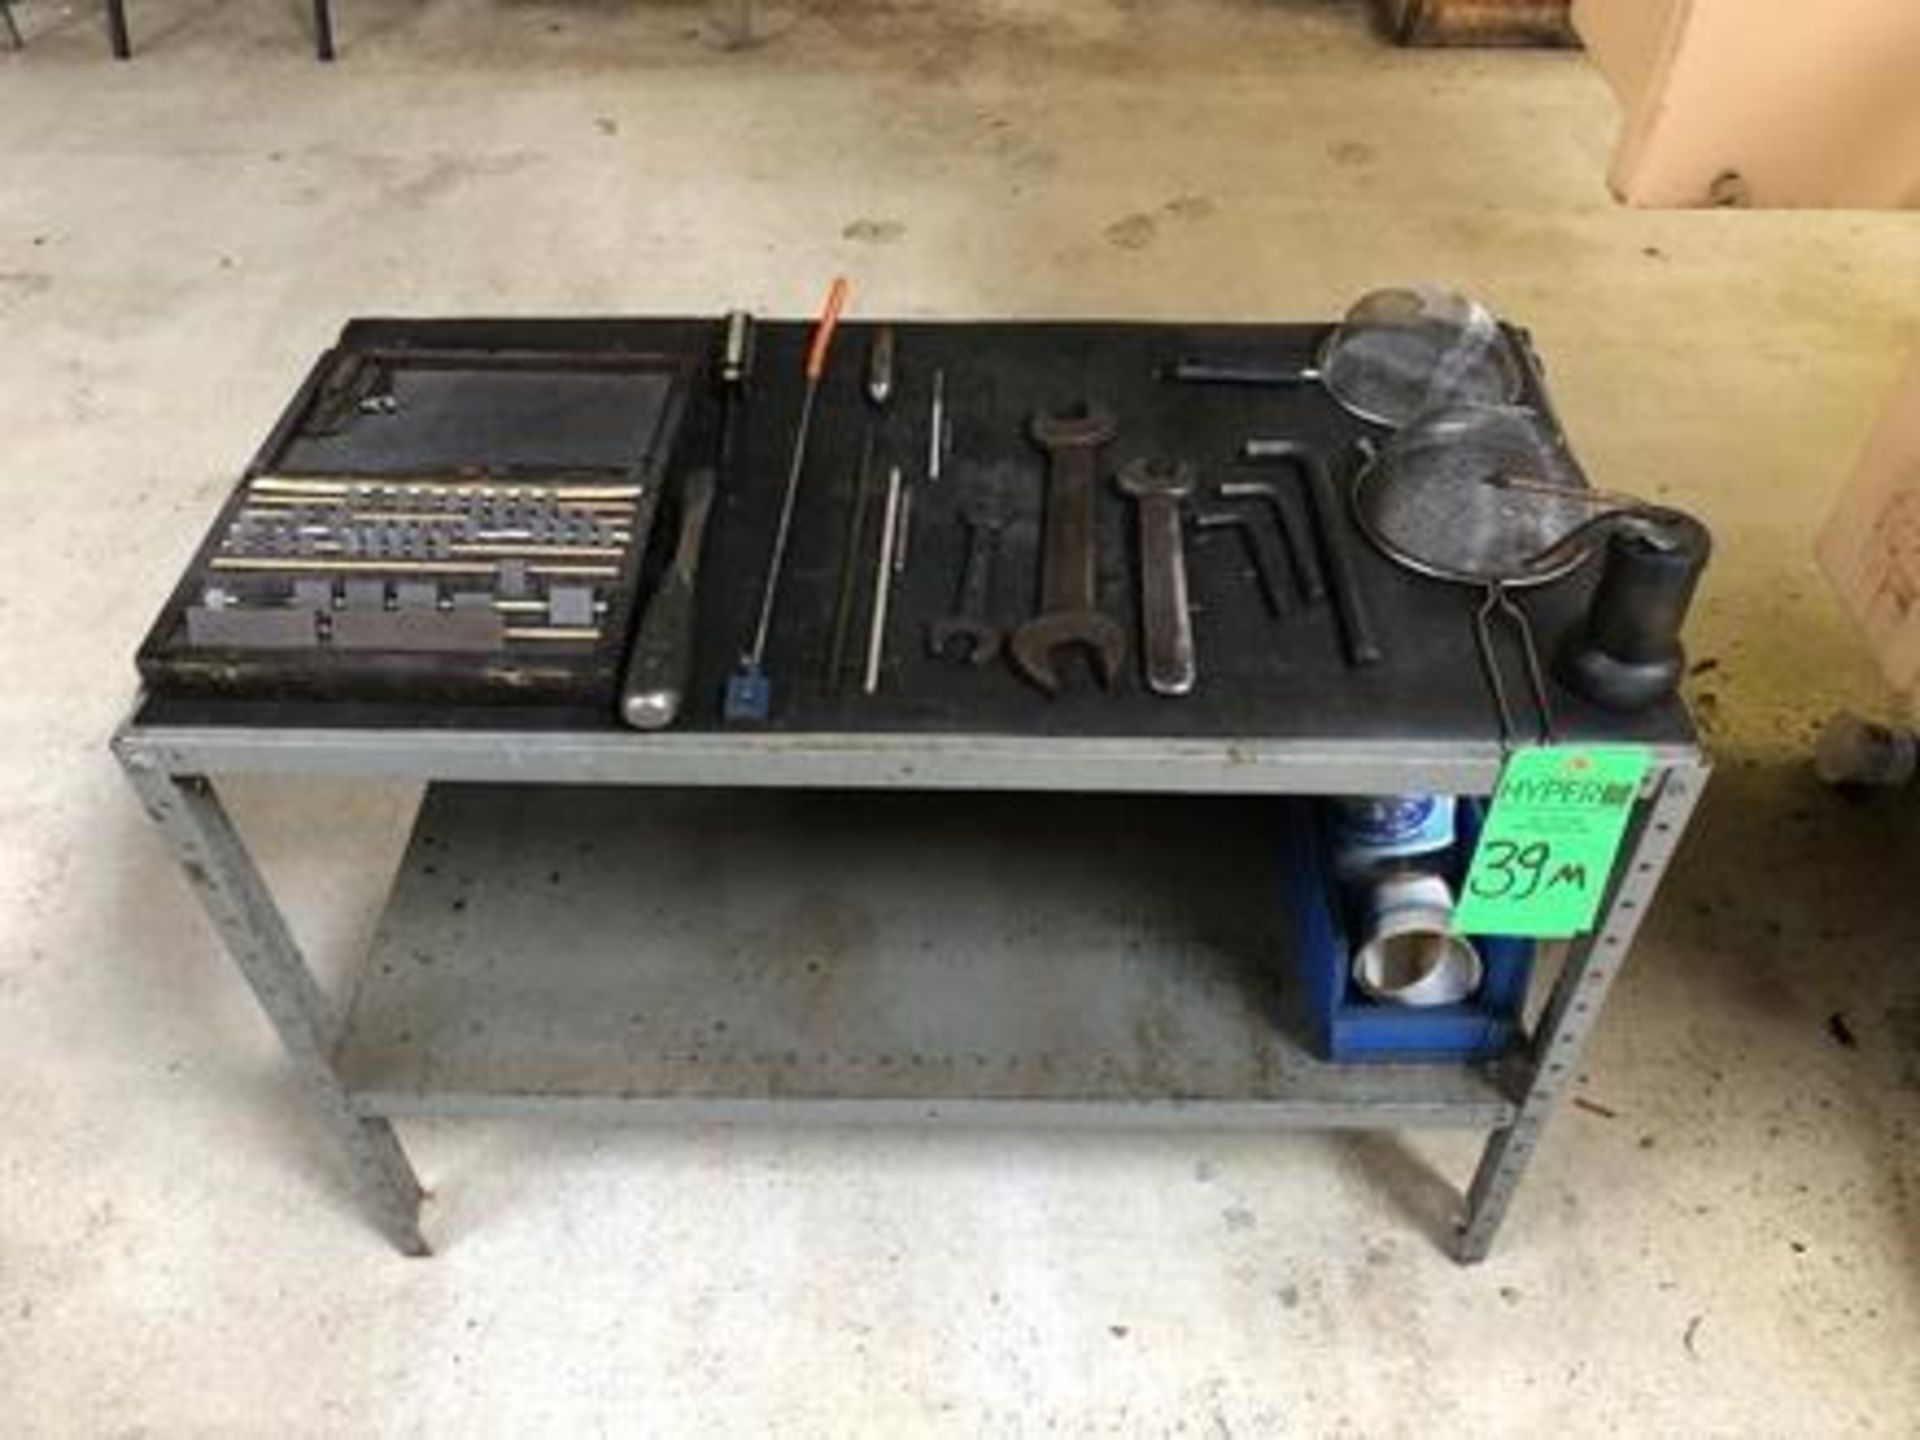 Metal shelf size: 36"X 18"x35" with contents c/o: tools for Cincinnati Centerless Grinder